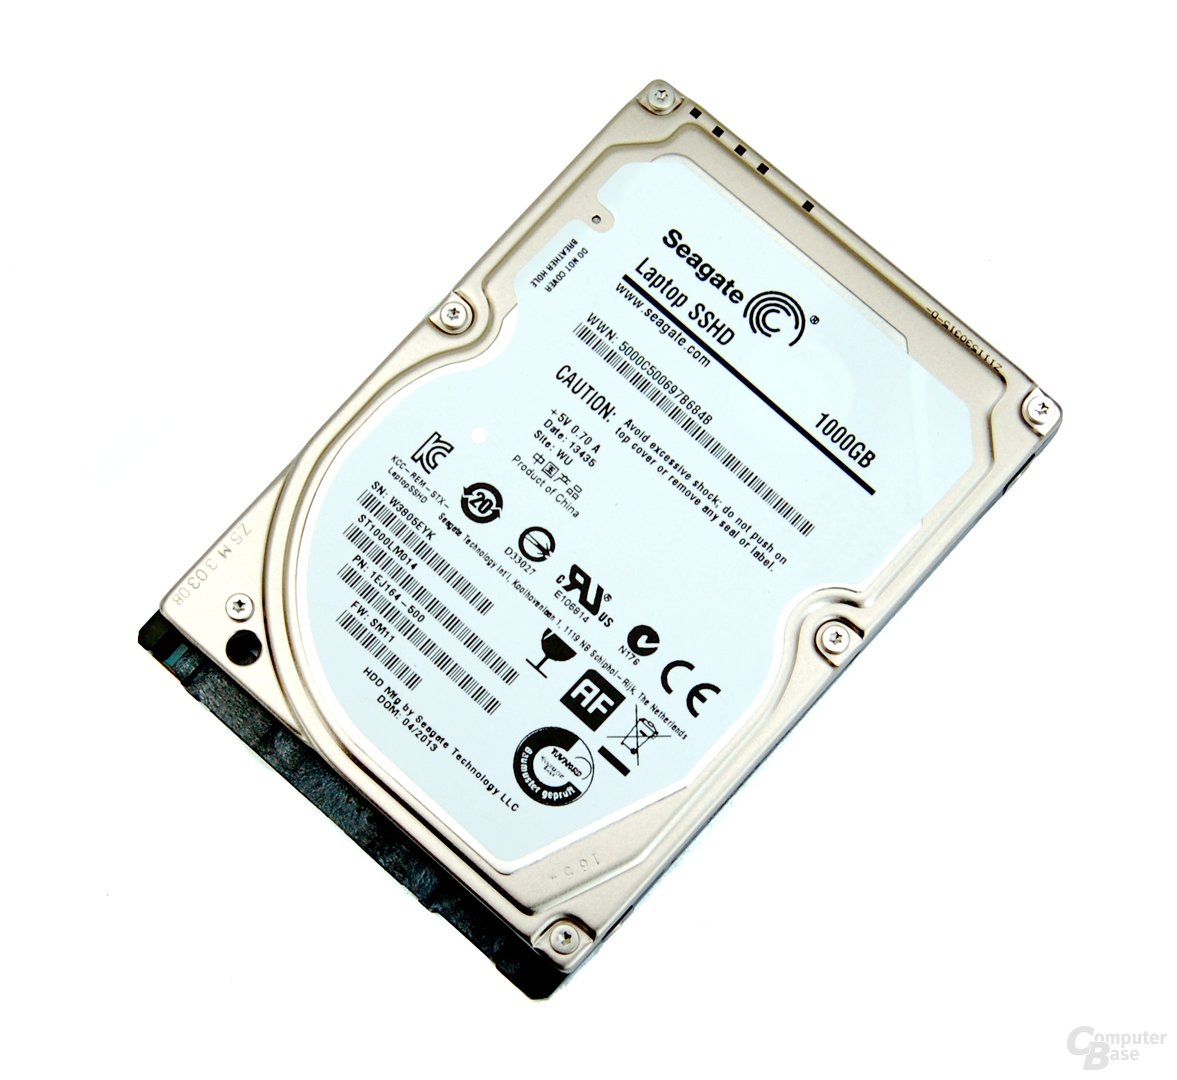 Seagate laptop SSHD ST1000LM014 "class =" border-image